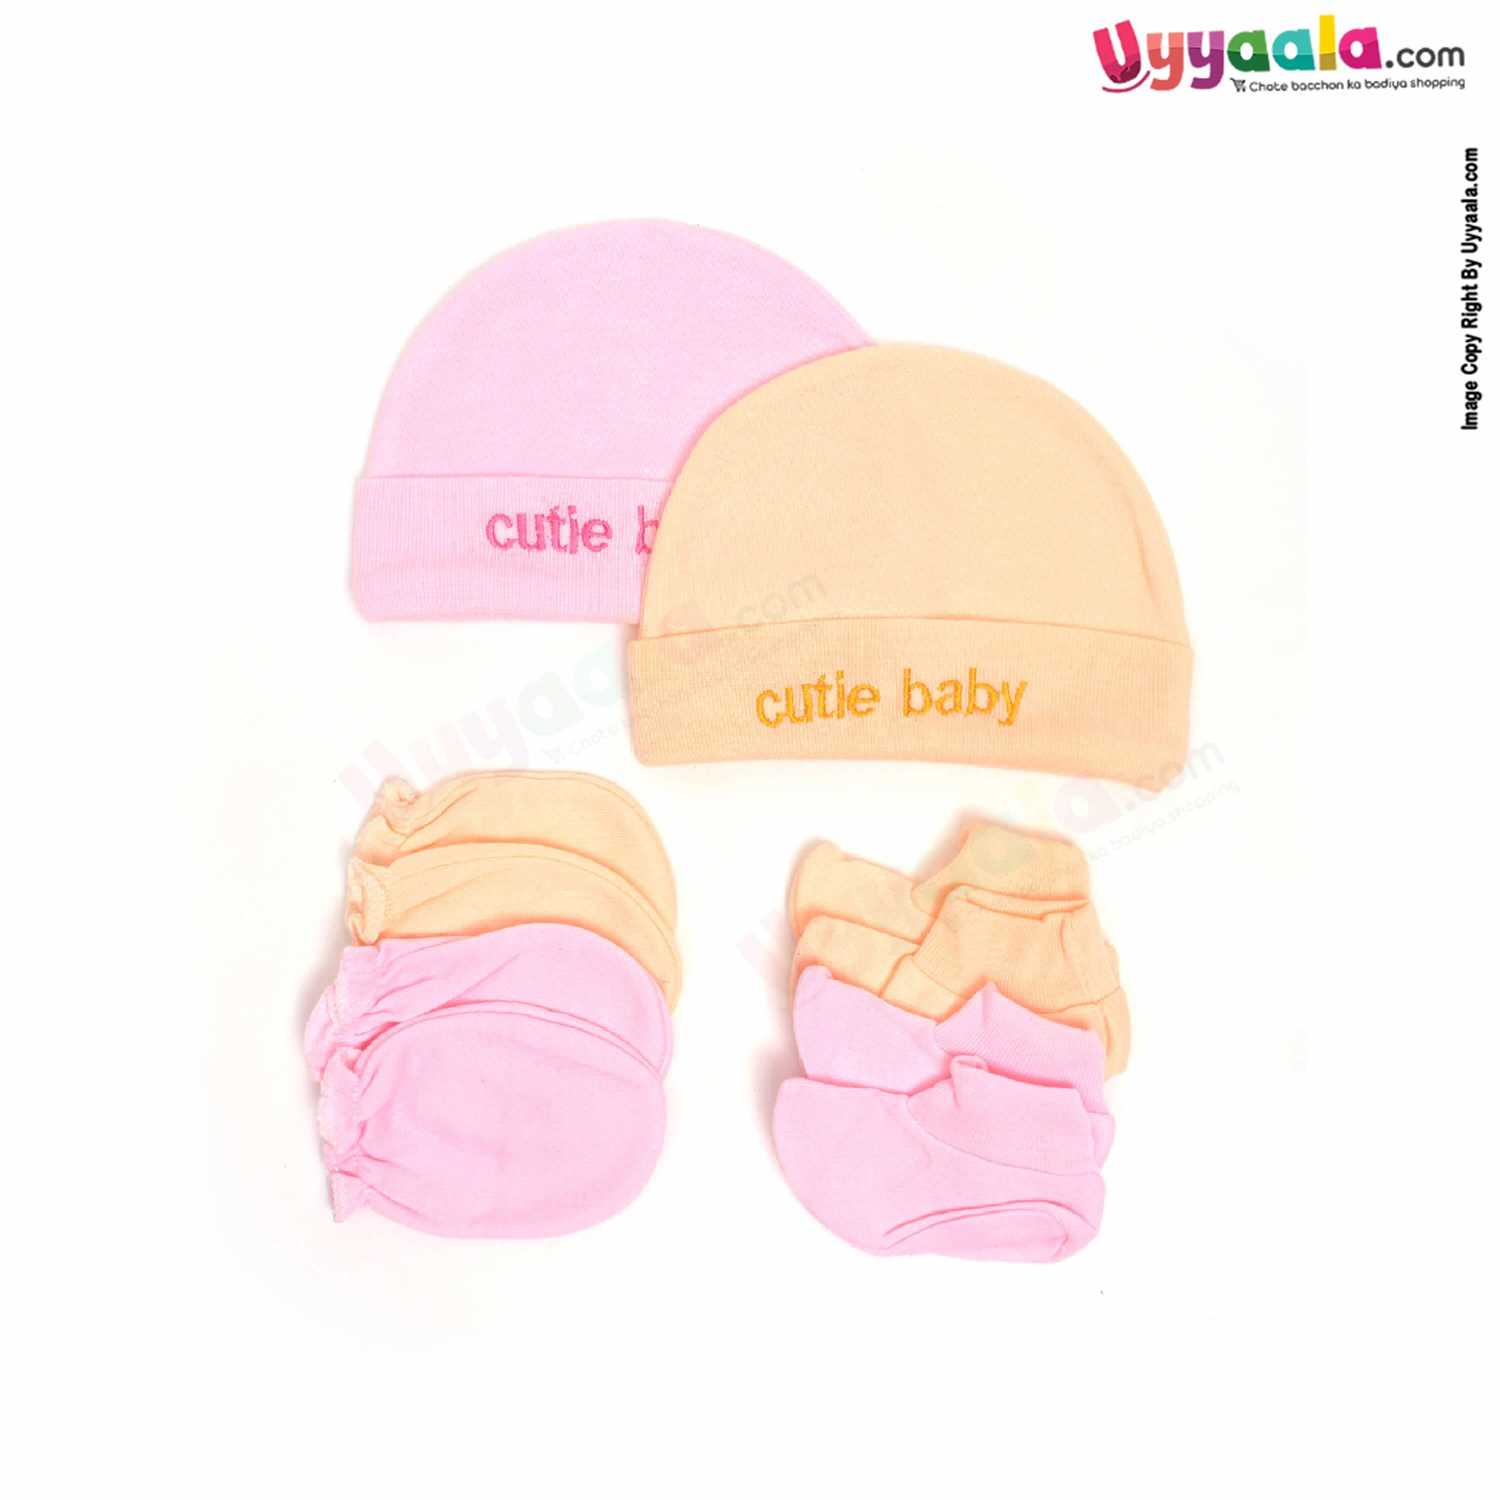 MONTALY Premium Quality Soft Hosiery Cotton Mitten, Booty & Cap Set for Babies Pack of 2 ,0-3m Age- Pink & Orange